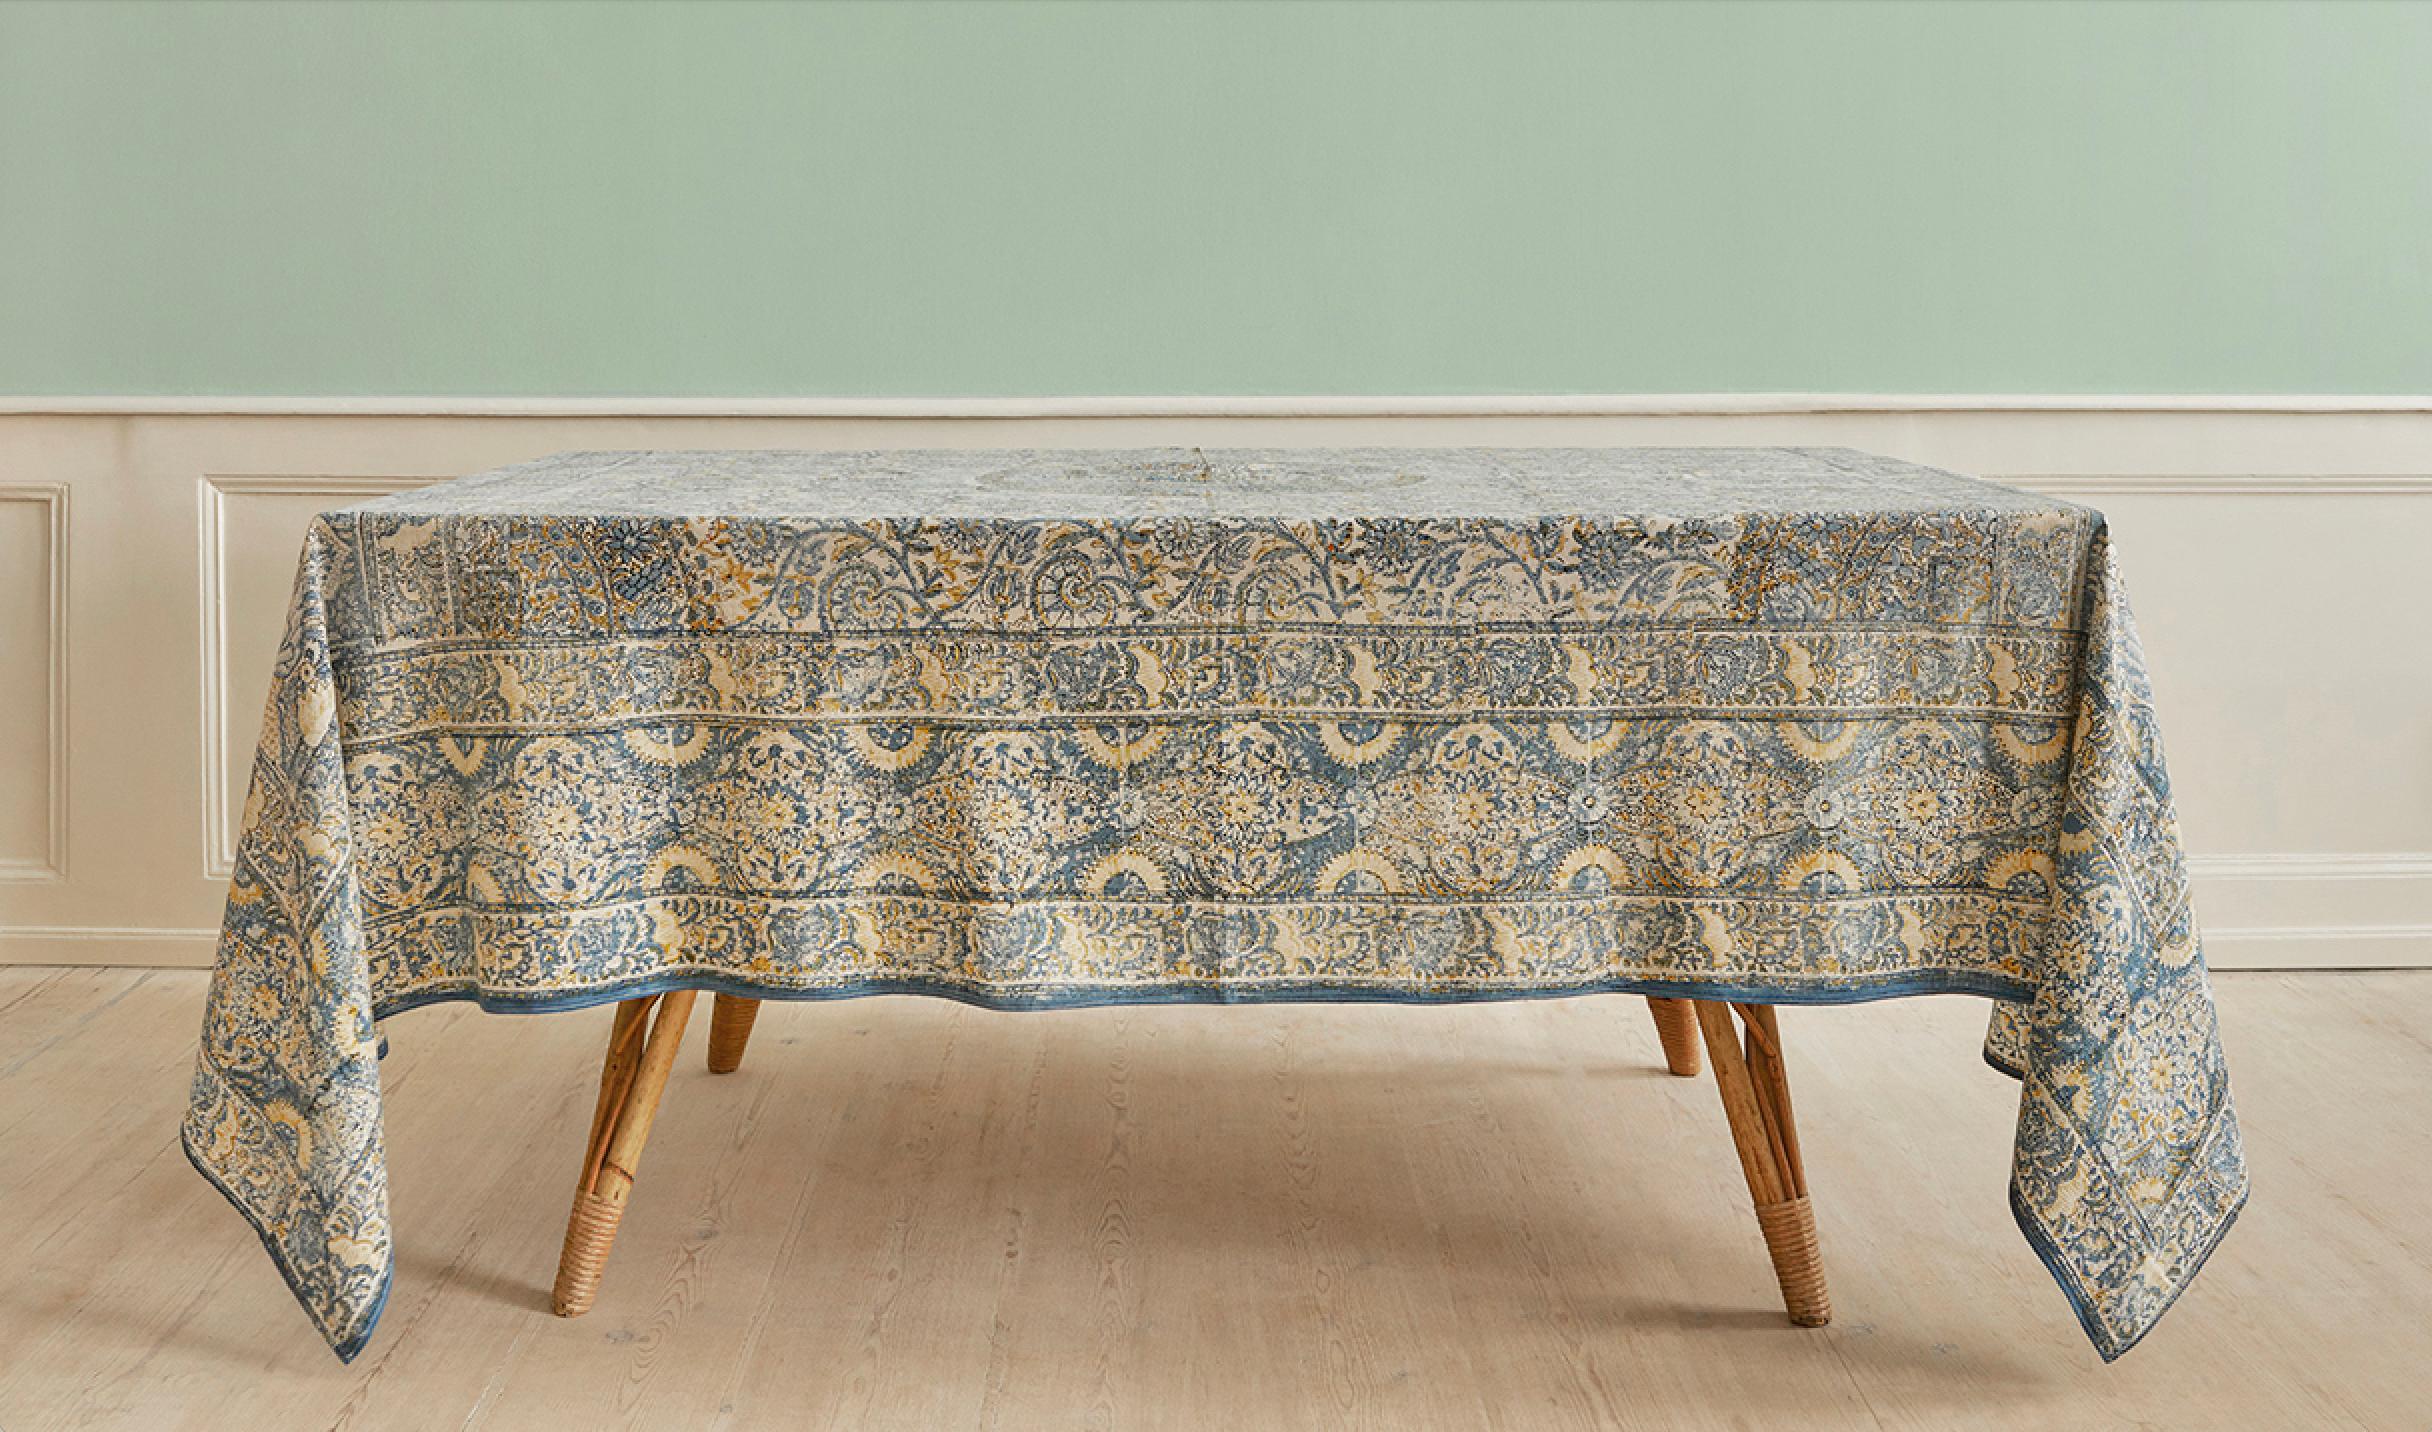 India, 1950s

Block printed tablecloth.

H 220 x W 240 cm